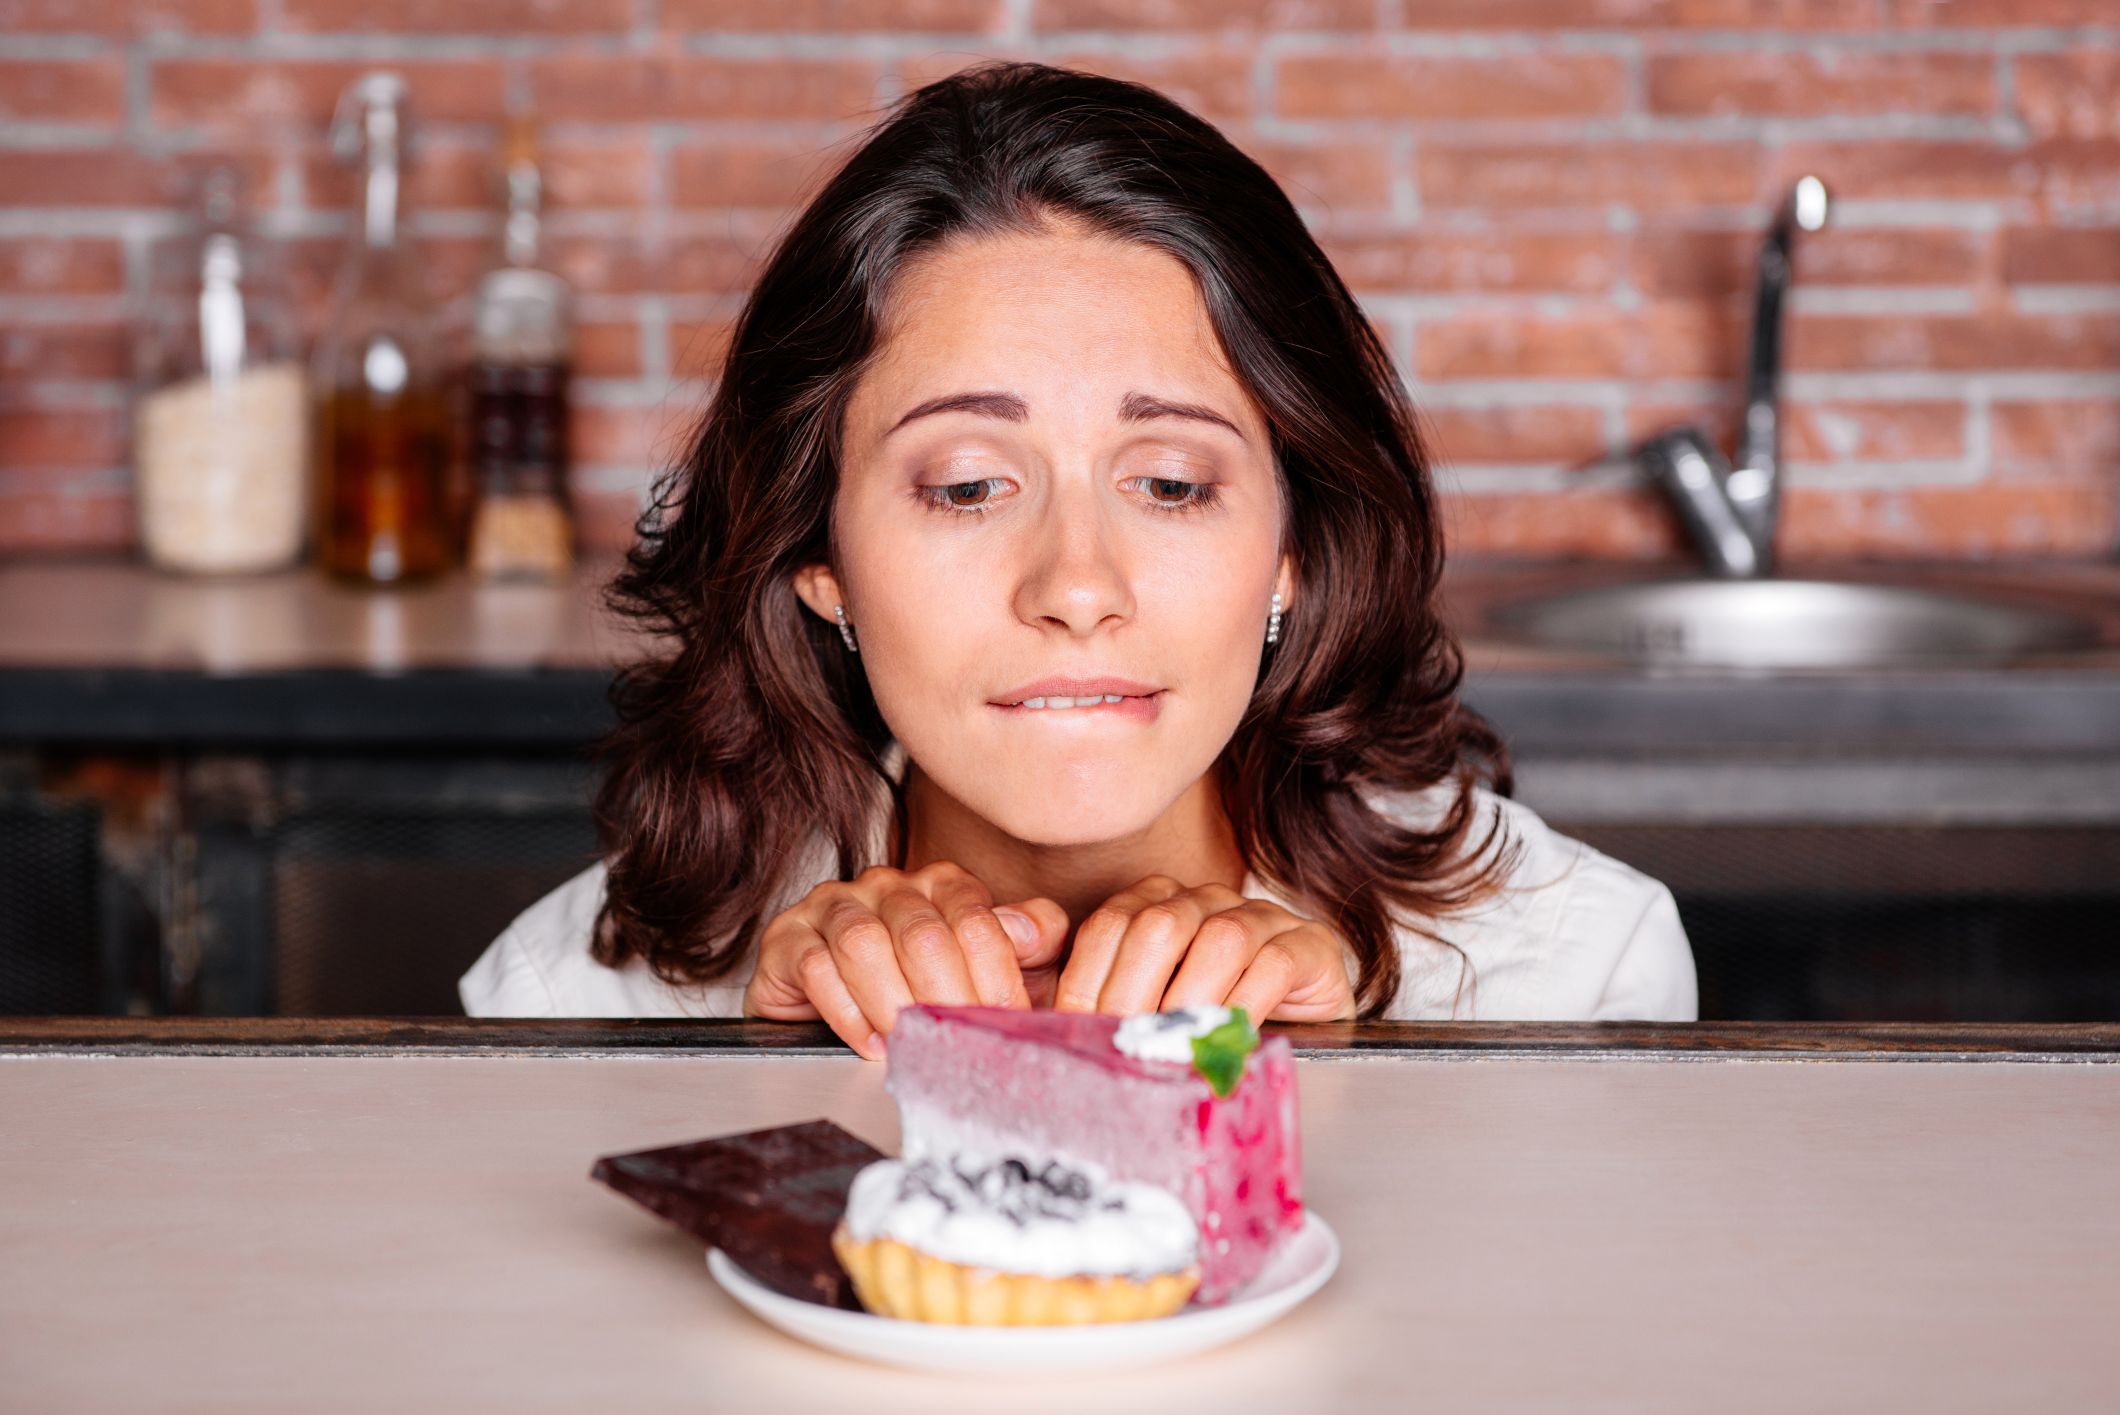 How to Find Wisdom in Food Cravings - Seniors Today